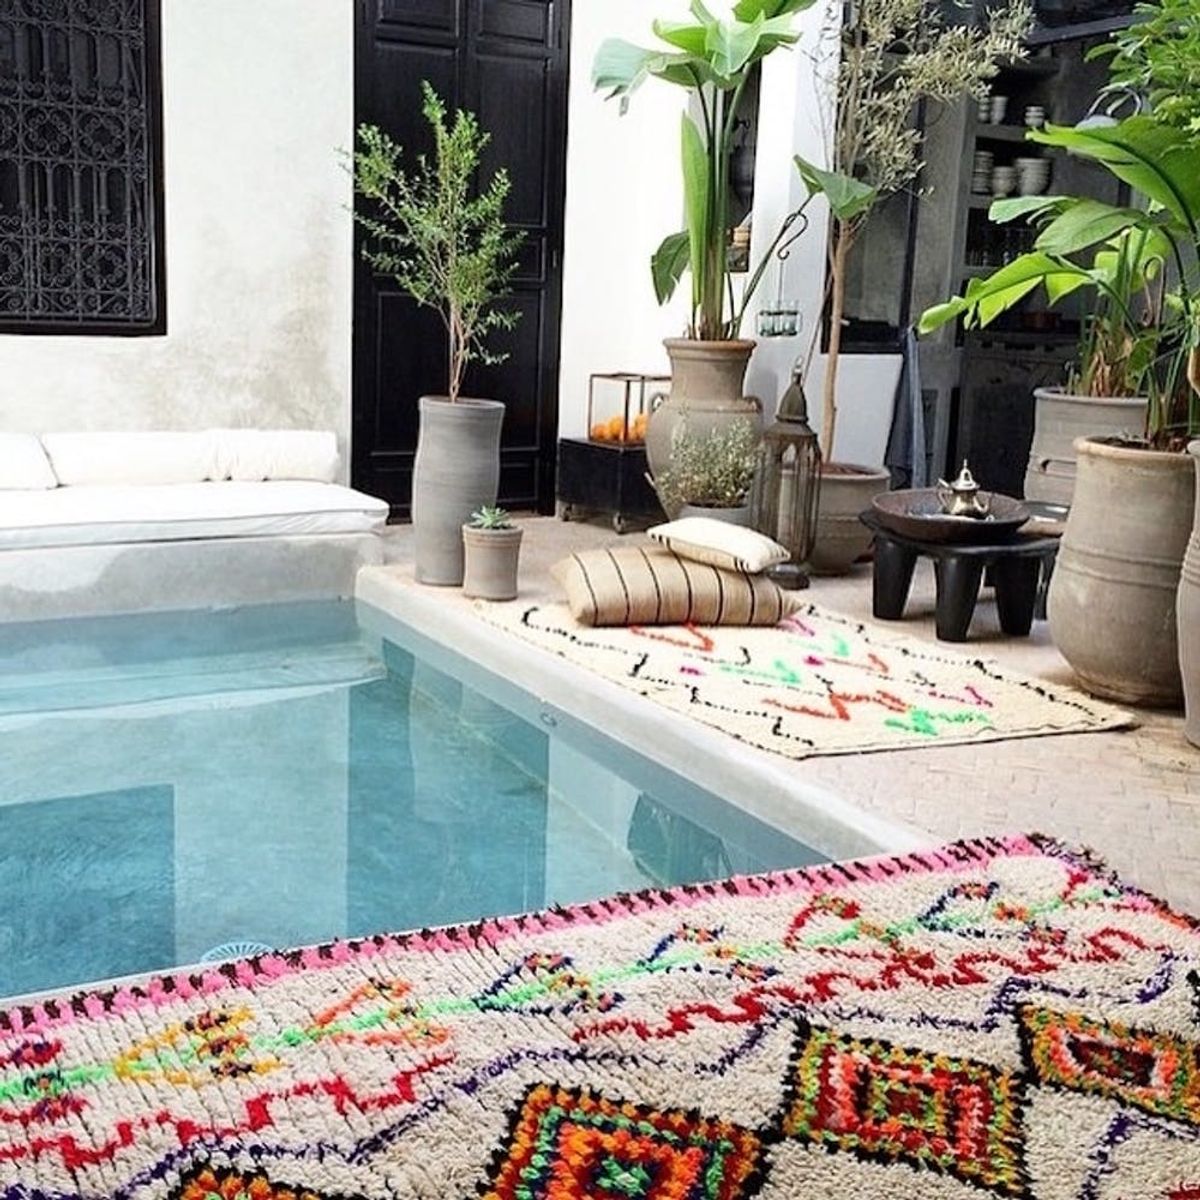 This New Pinterest Rug Trend Will Bring Both Color + Texture to Your Home